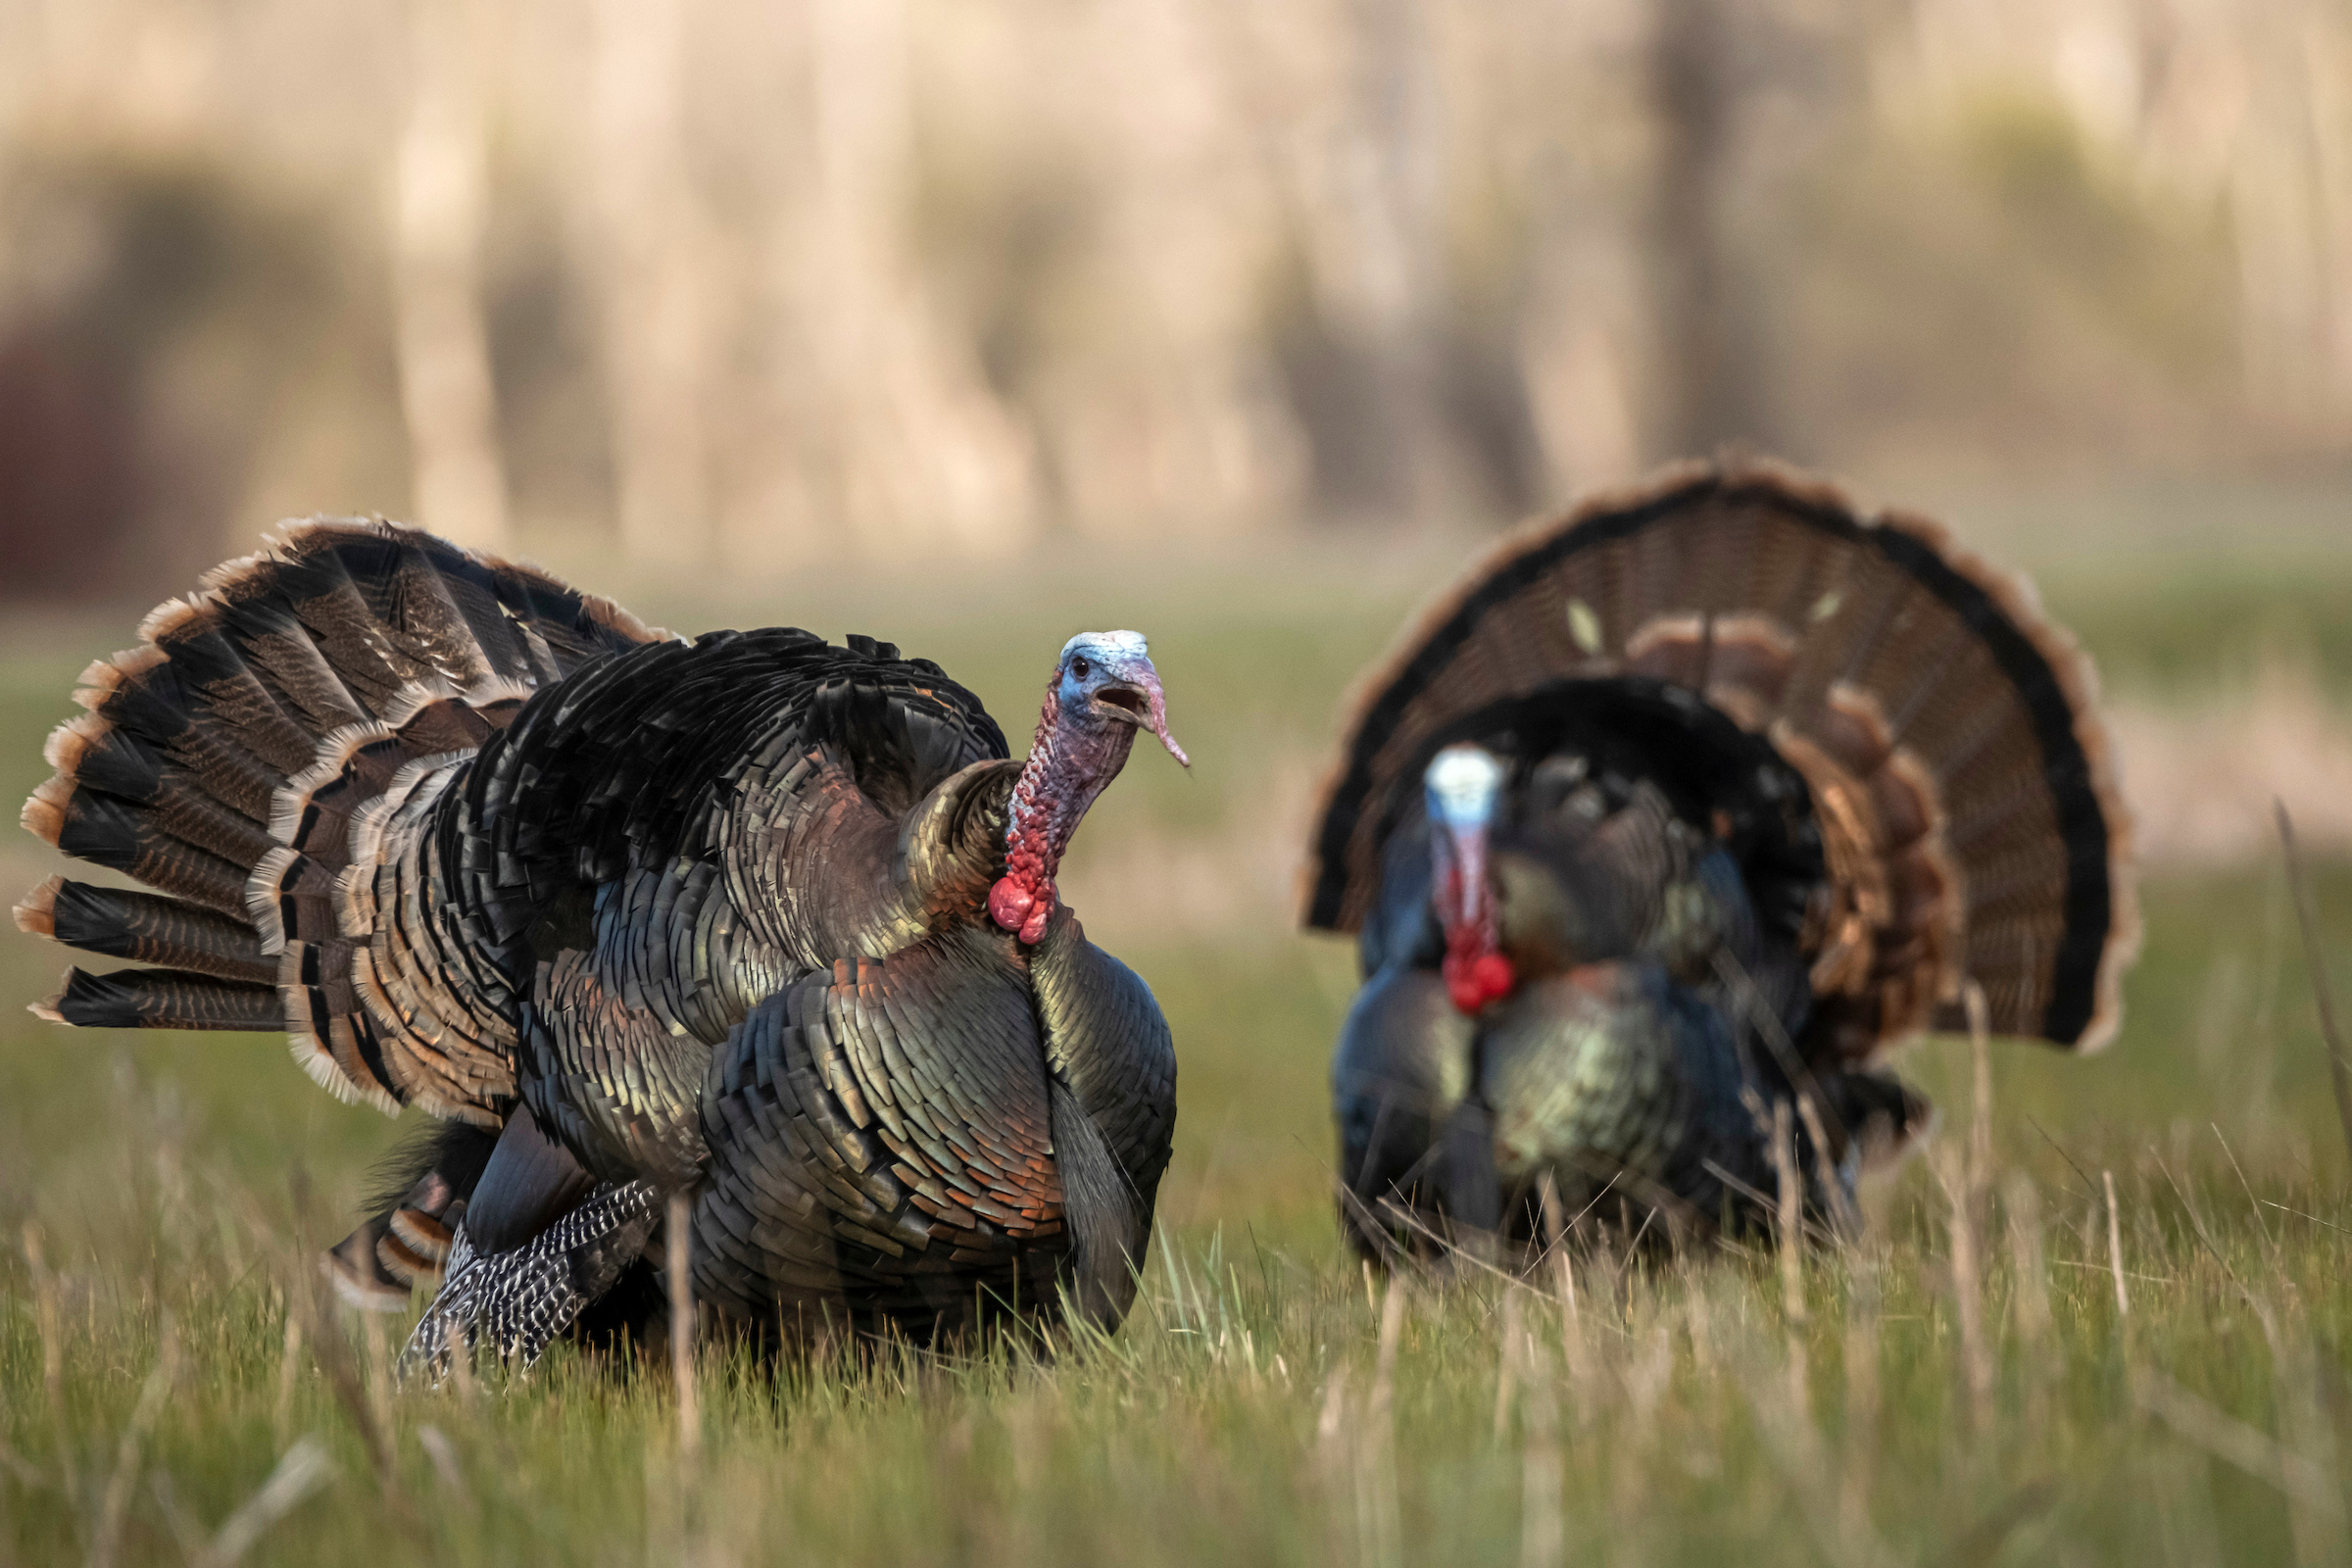 Turkey hunting is up—and down—across the country this spring.